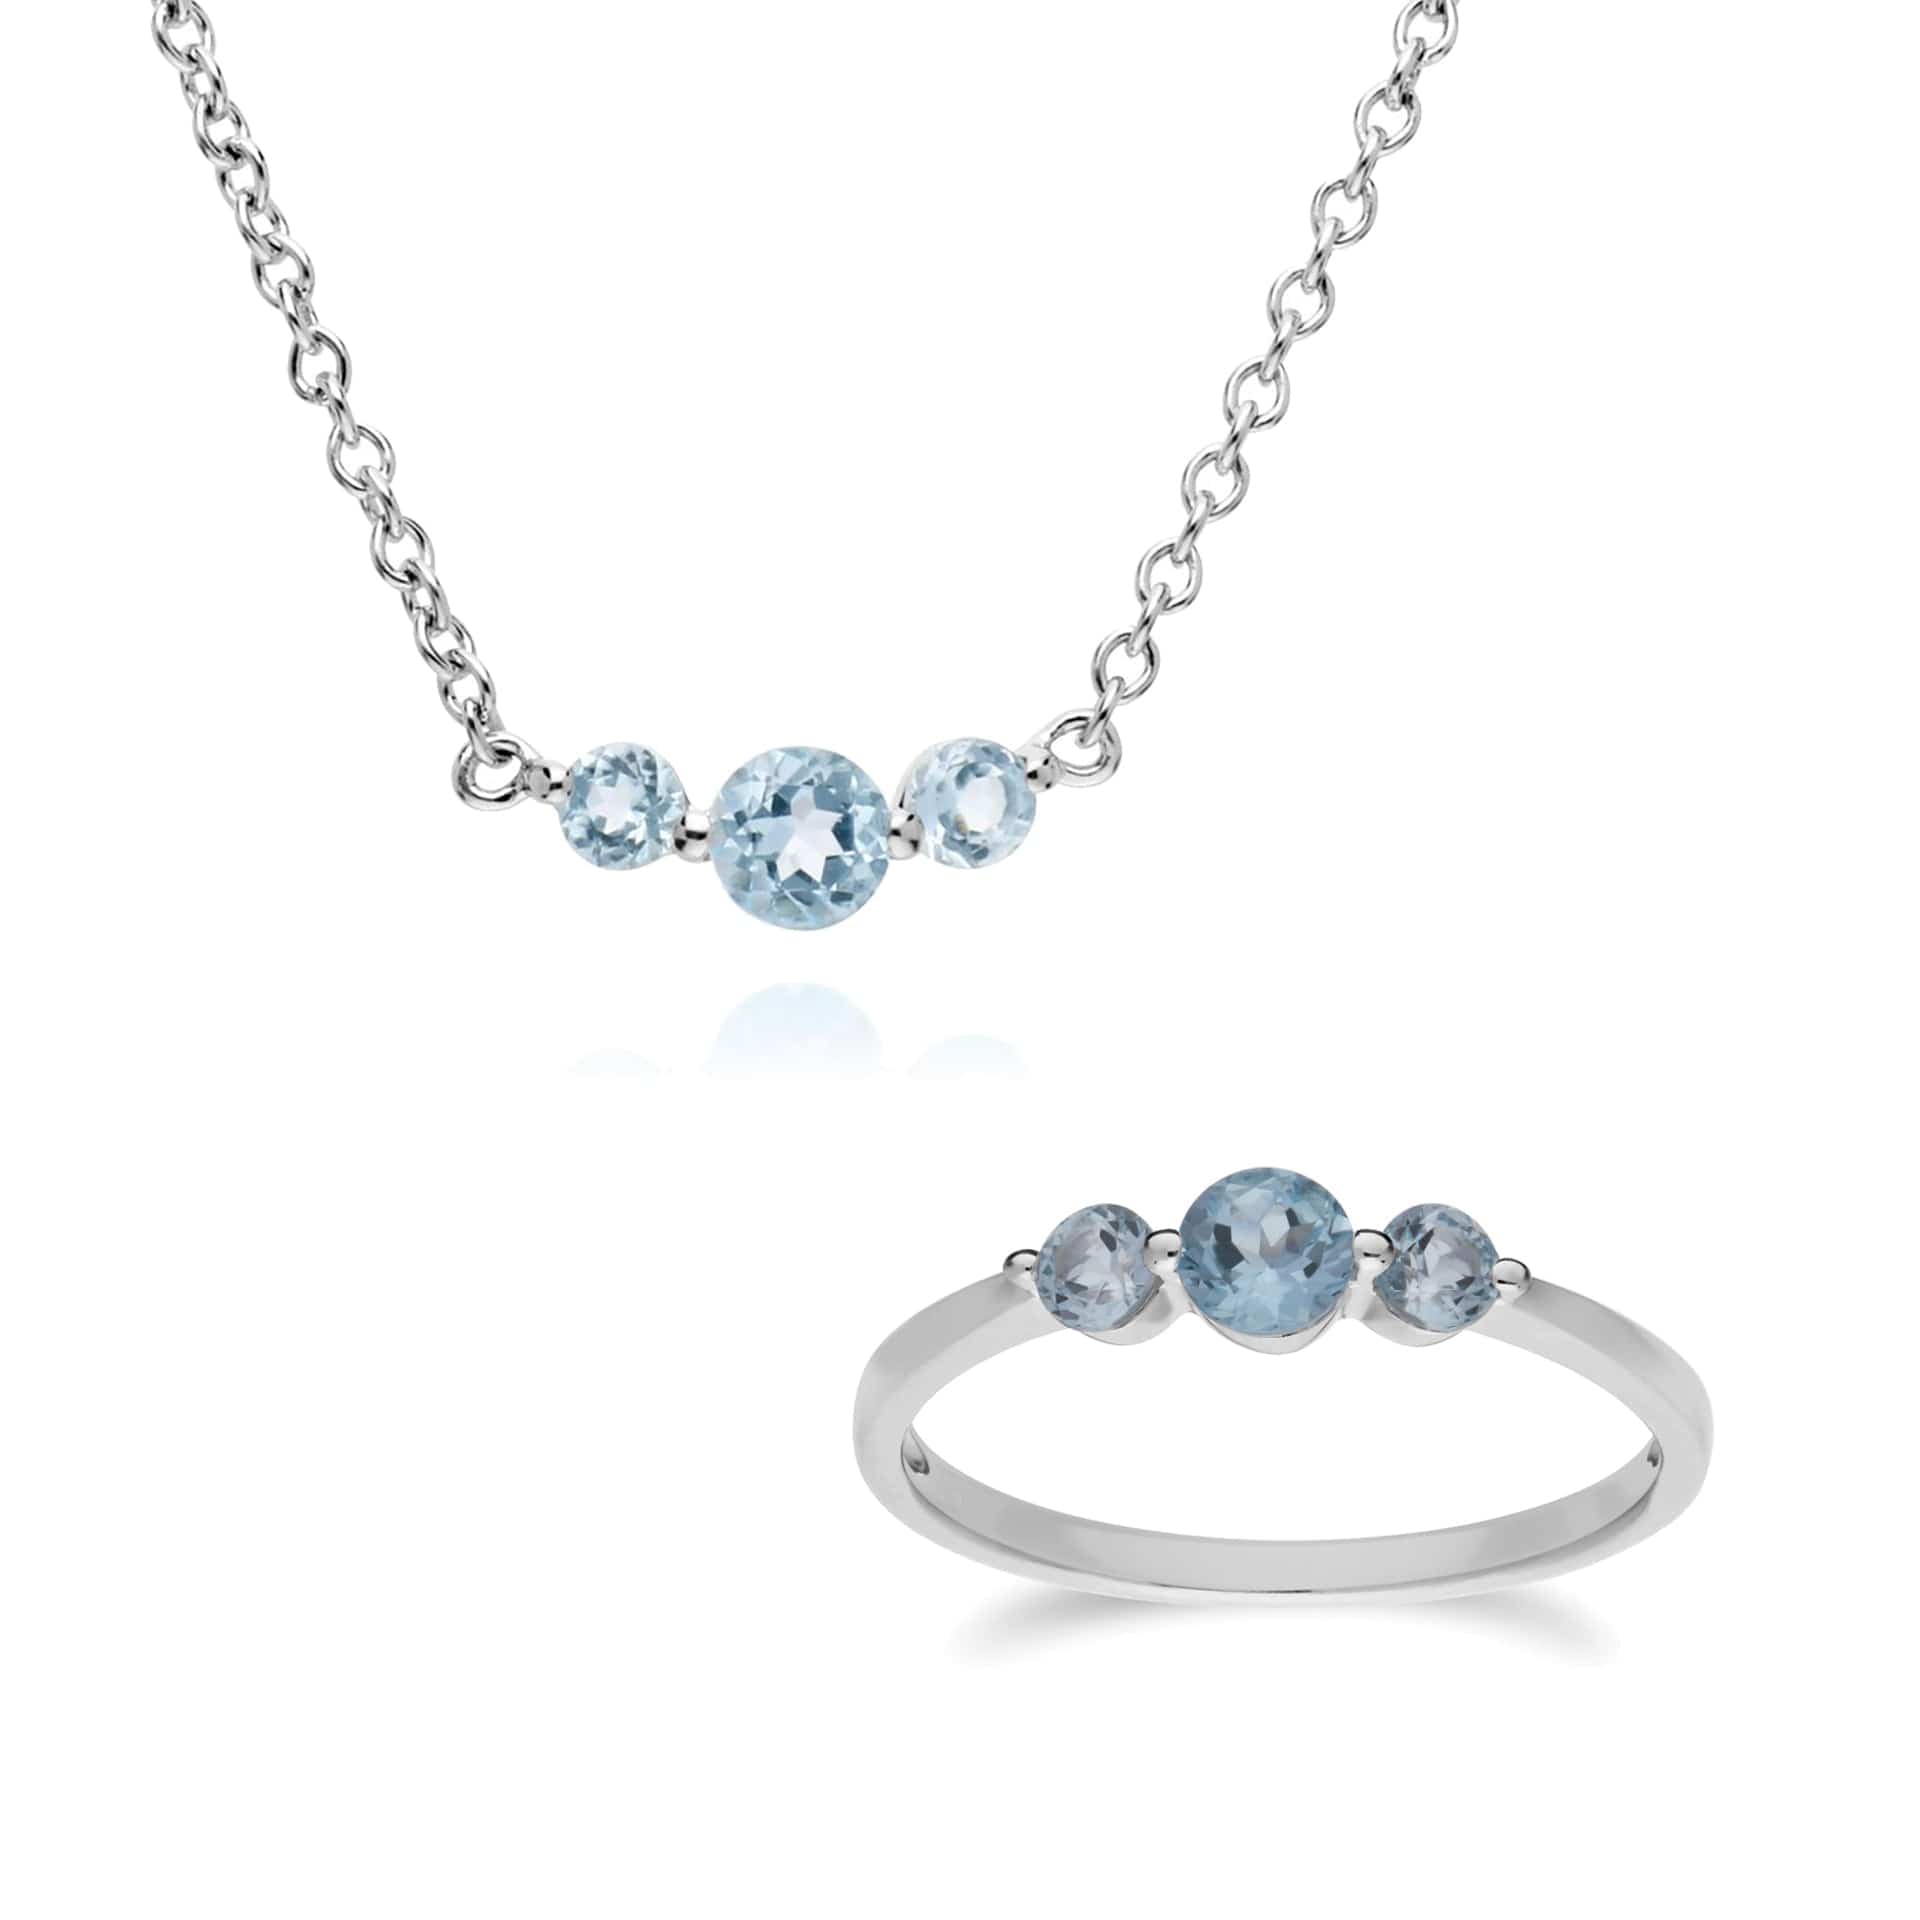 270N034201925-270R056001925 Classic Round Blue Topaz Three Stone Gradient Ring & Necklace Set in 925 Sterling Silver 1